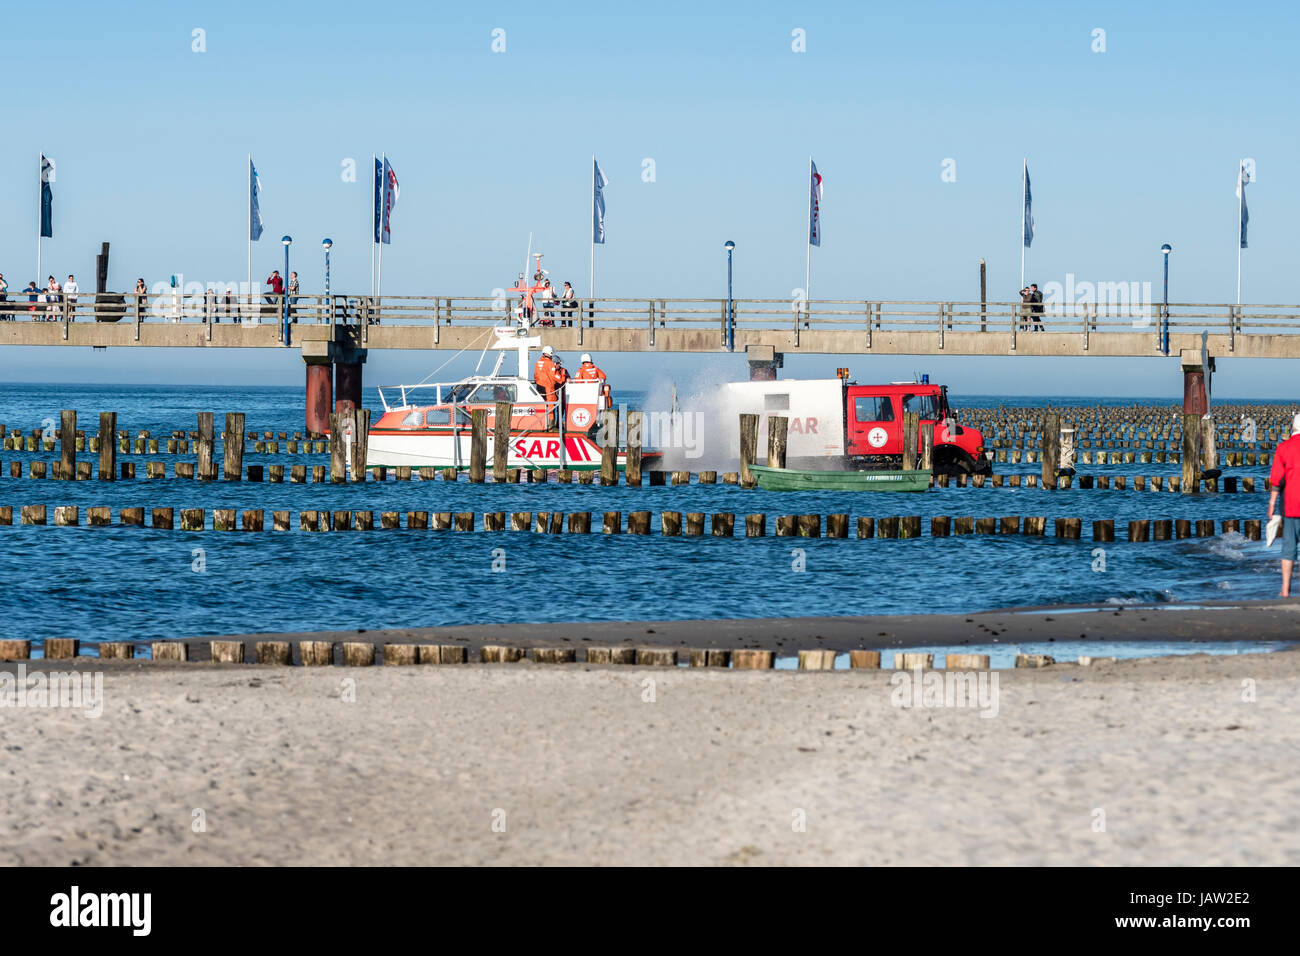 Truck move a small emergency rescue cruiser into the sea, part of a skill presentation at wharf of Zingst during festival 'Horizonte', Baltic Sea, pen Stock Photo